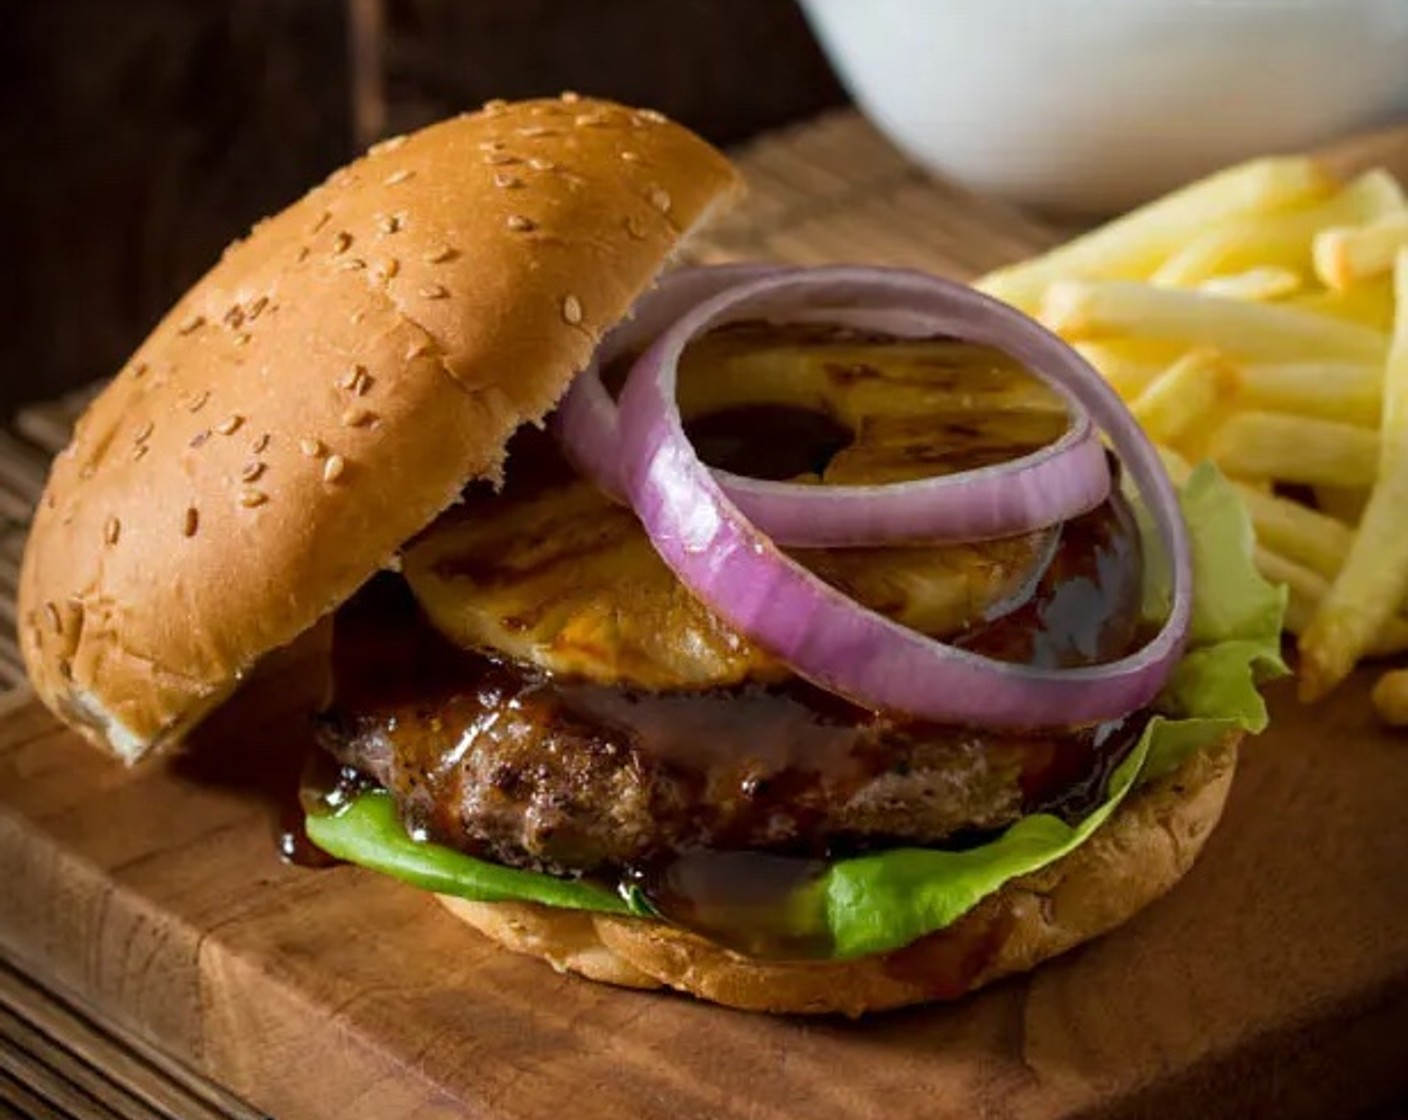 Spicy Teriyaki Burger with Grilled Pineapple